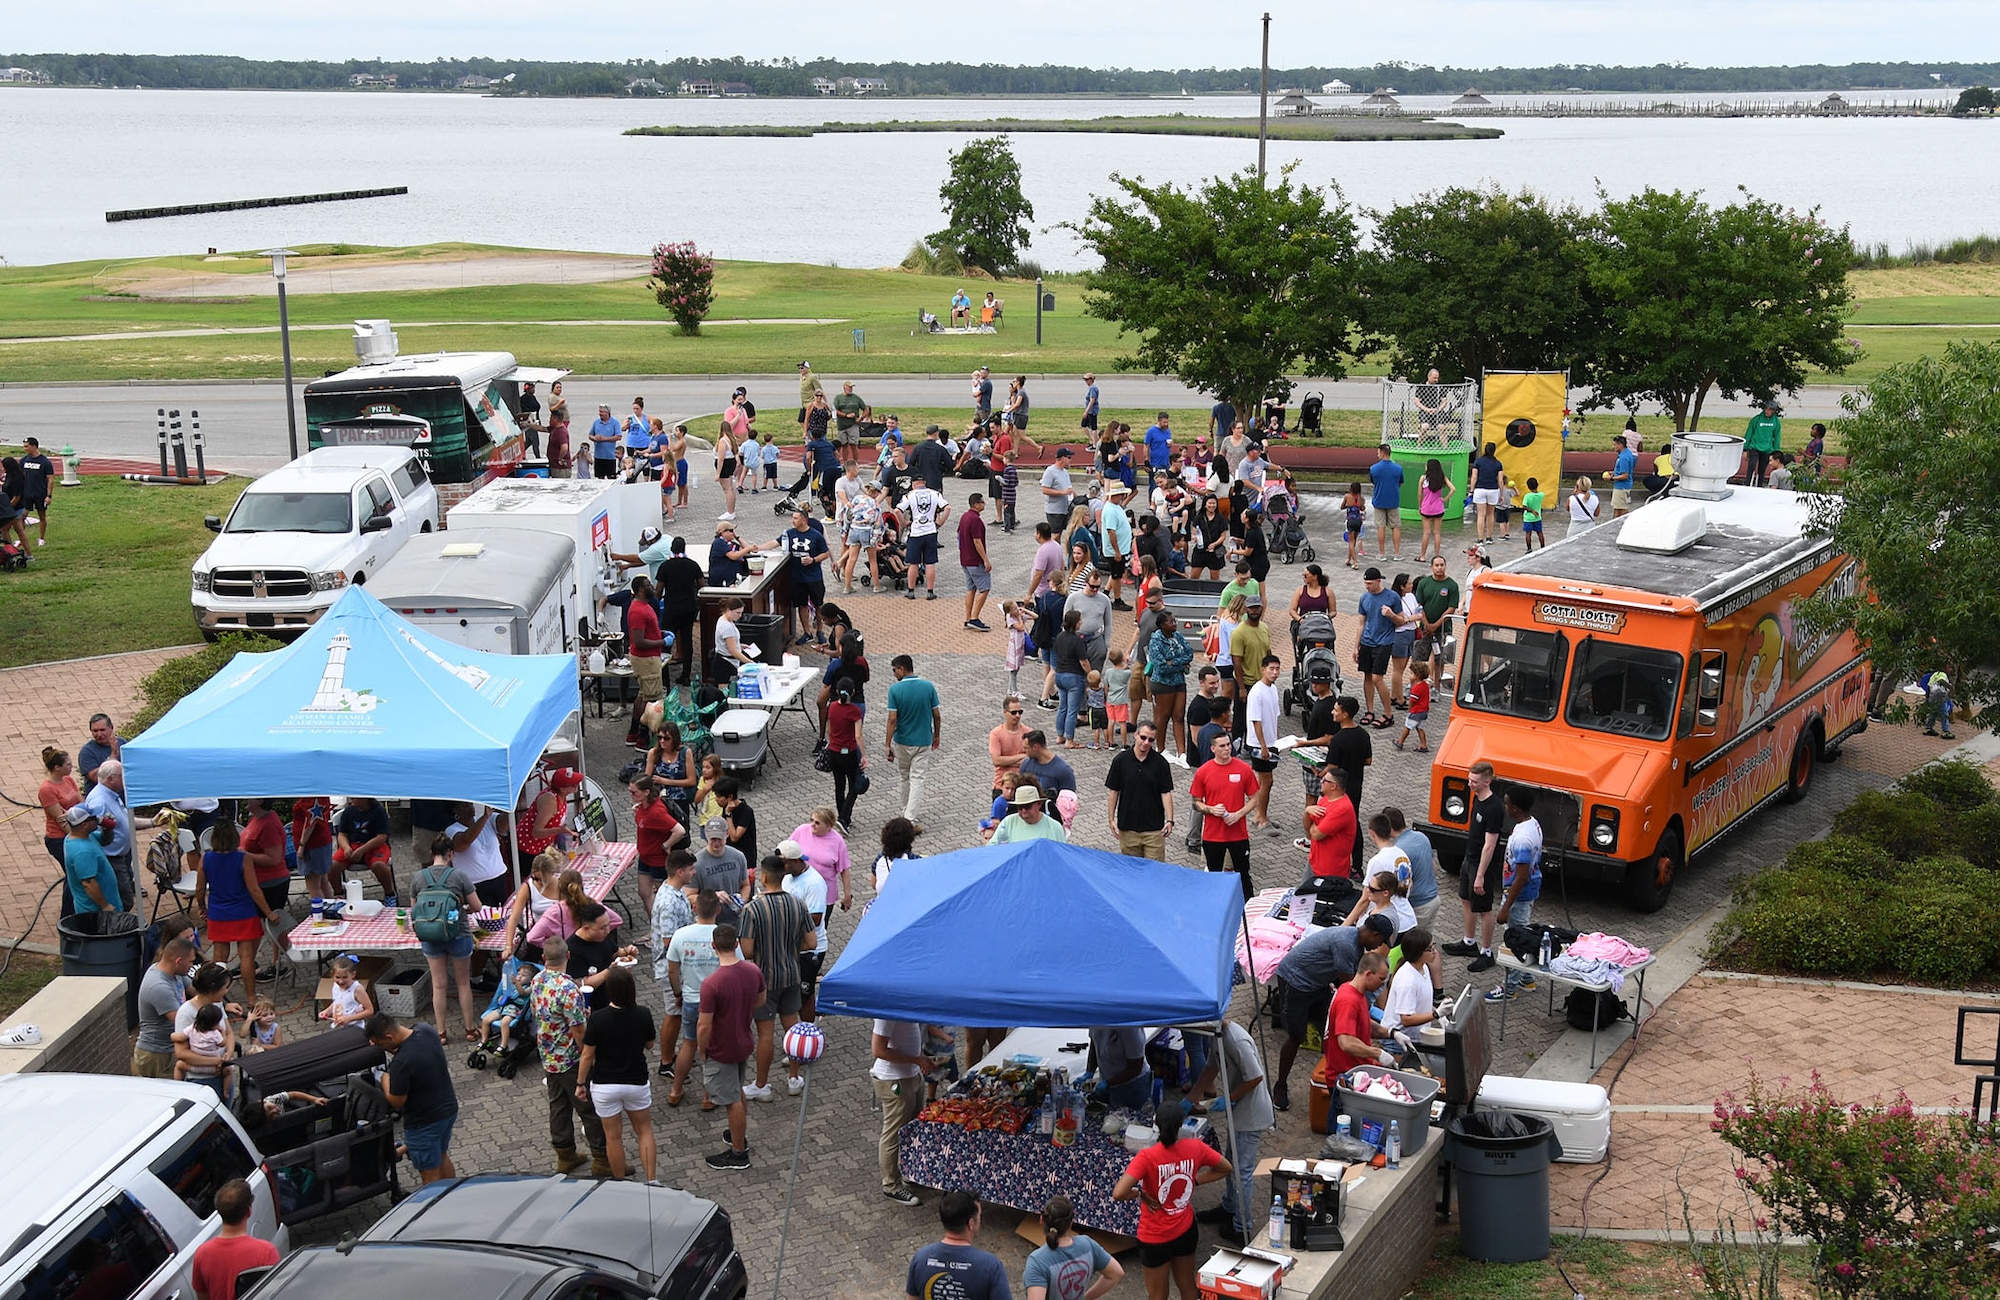 Keesler personnel and families attend during Freedom Fest at the Bay Breeze Event Center on Keesler Air Force Base, Mississippi, June 30, 2022. The event also included hot wings and watermelon eating contests and fireworks. (U.S. Air Force photo by Kemberly Groue)